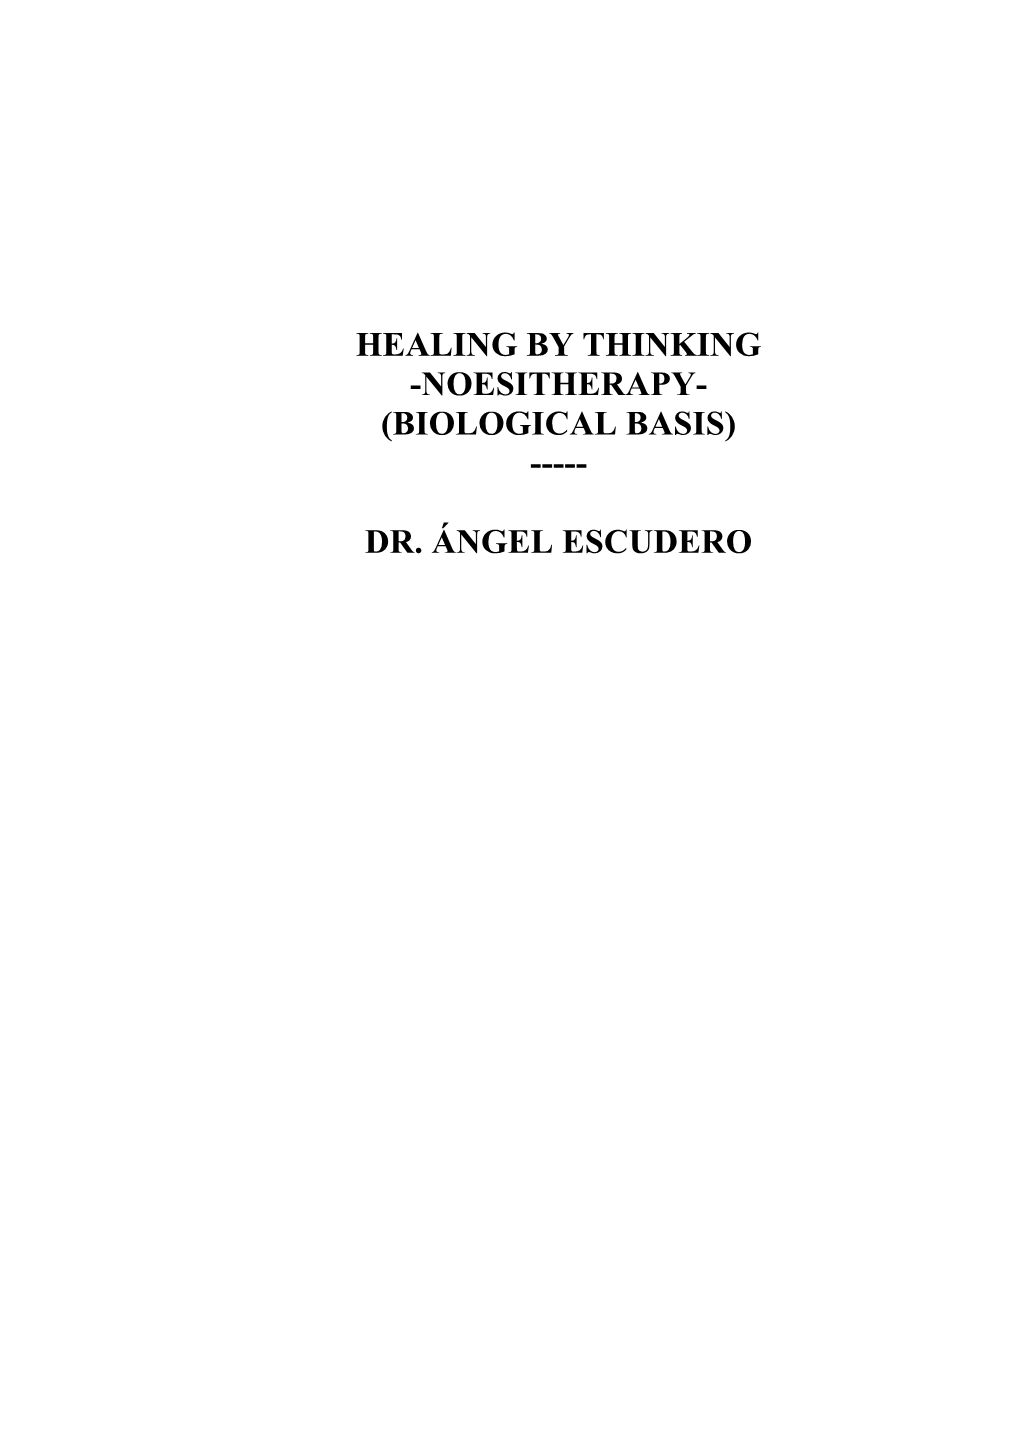 Healing by Thinking -Noesitherapy- (Biological Basis) ---Dr. Ángel